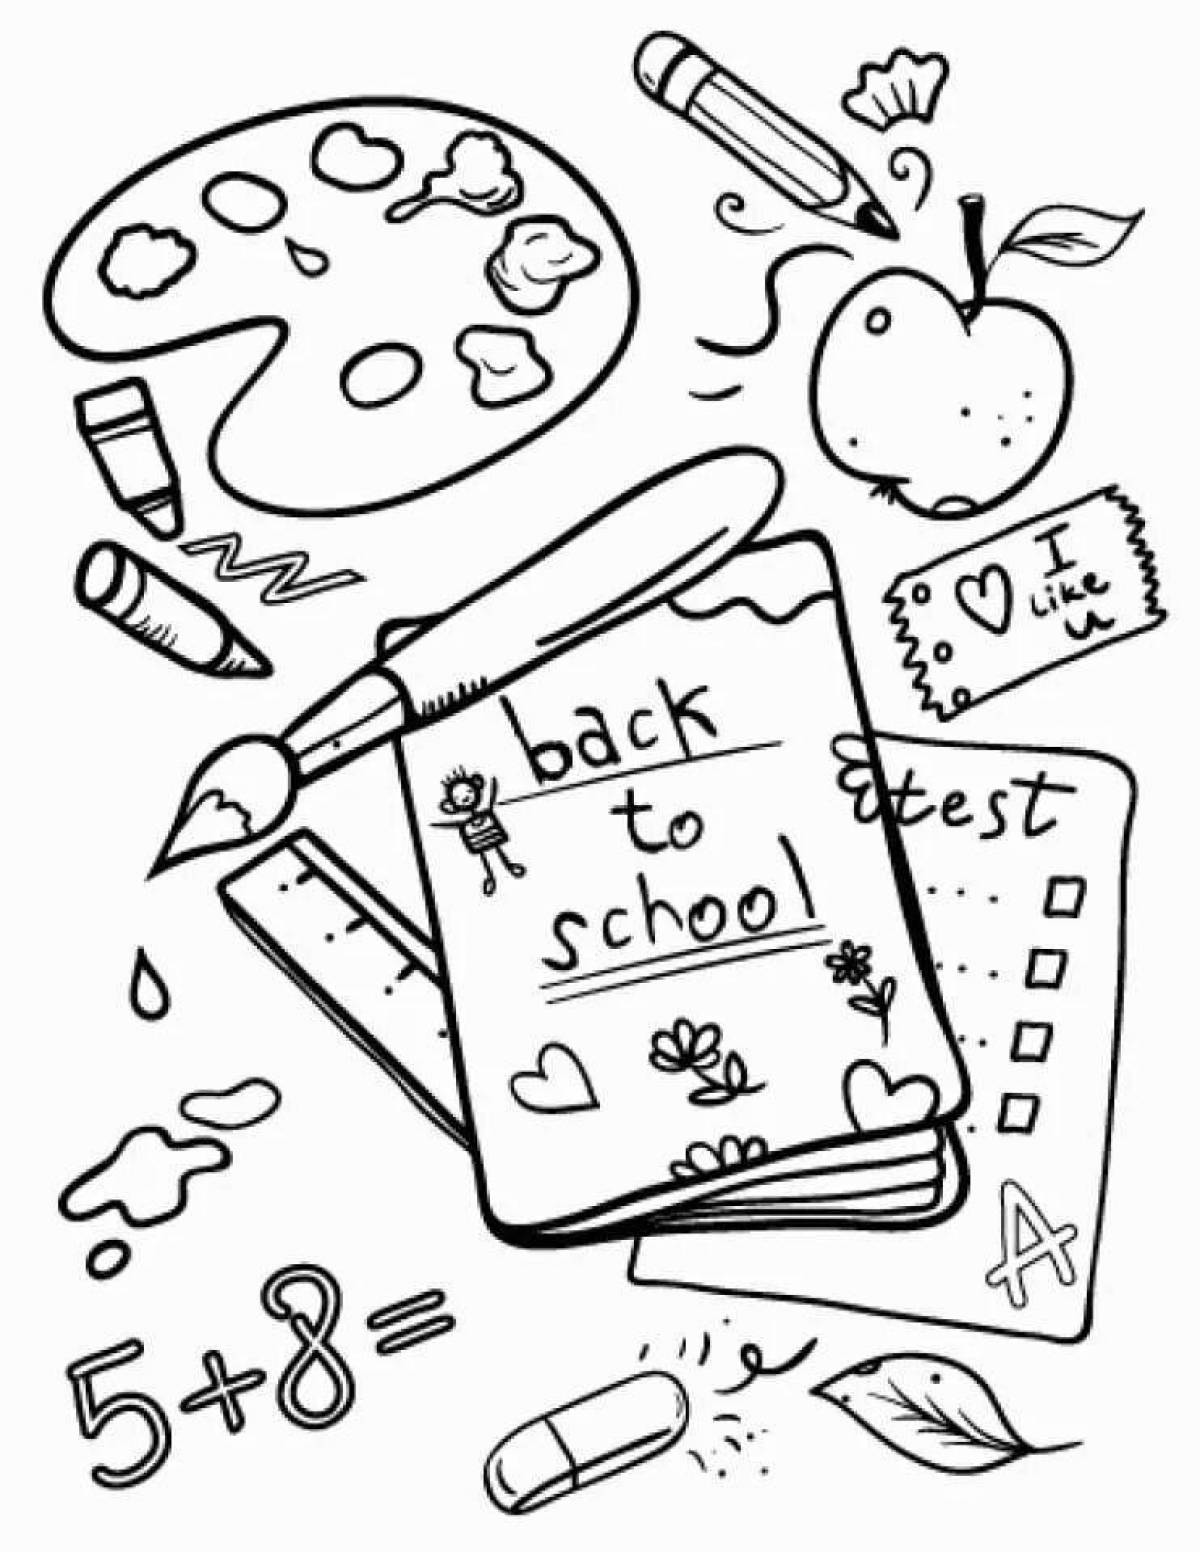 Colourful school bus coloring page